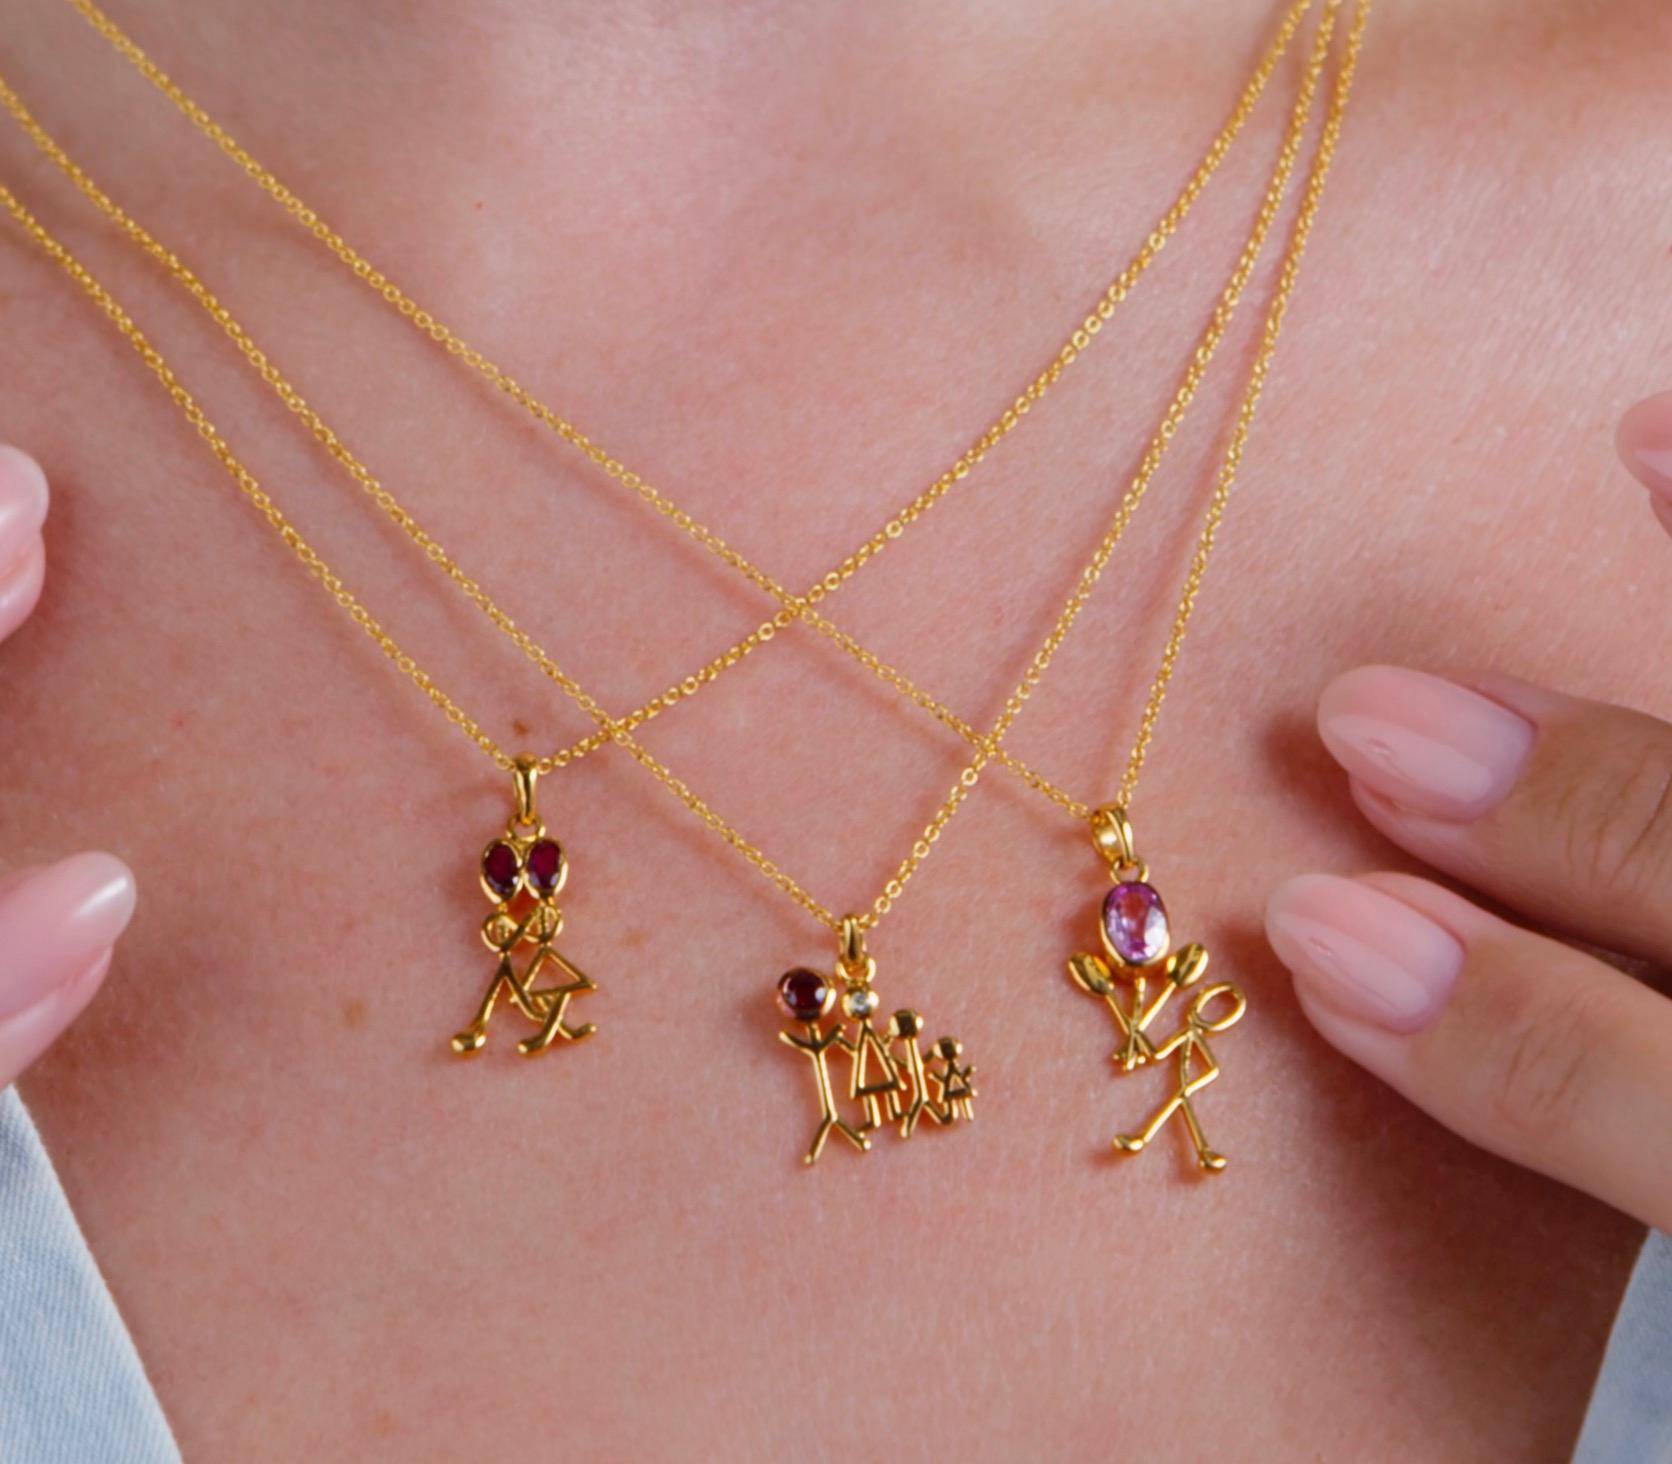 0.24 Carat Ruby Yellow Gold Stick Figure Pendant Necklace (Leftmost in images)

The pendant on this necklace depicts two stick figures (one man and one woman) with ruby heads and holding hands. Their arms form an infinity symbol. This necklace is